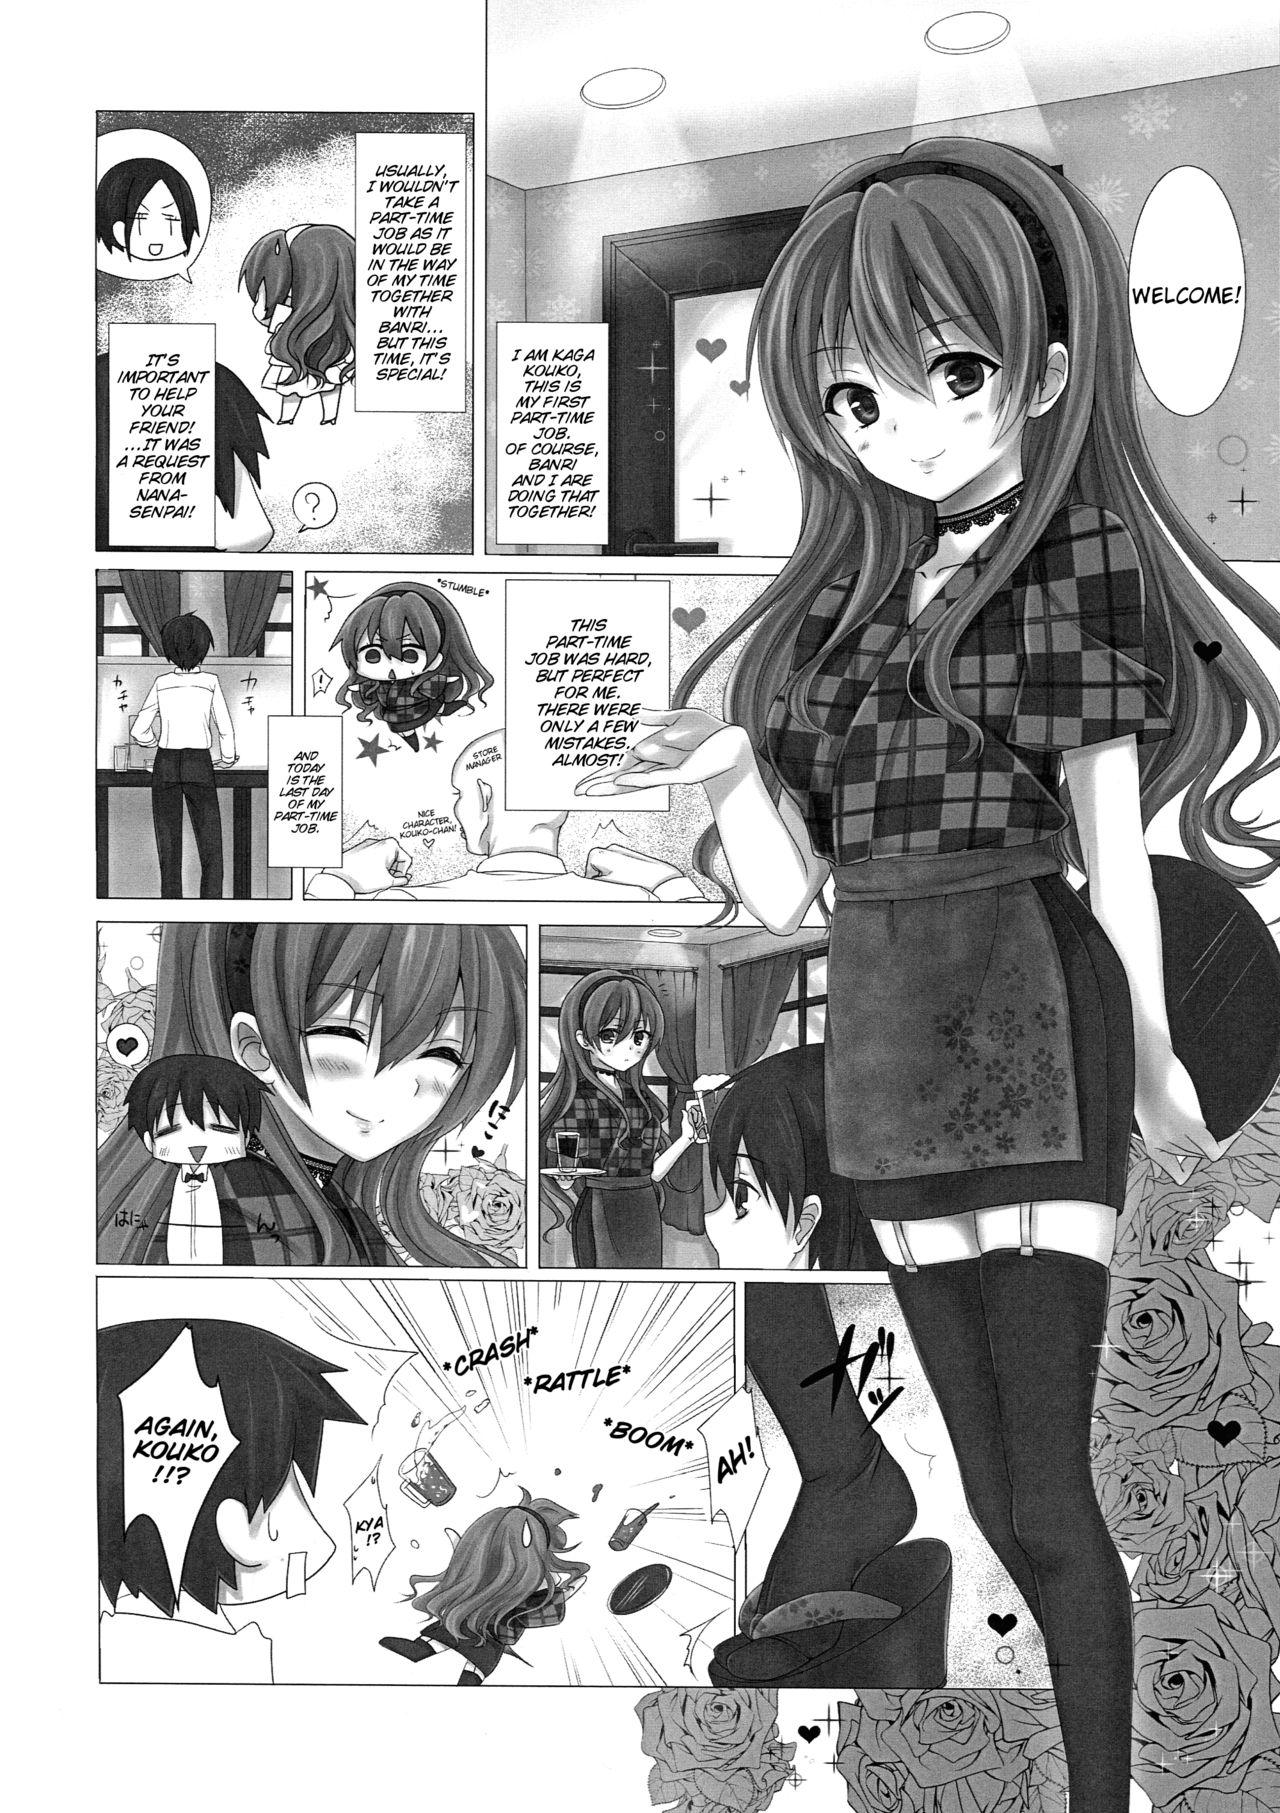 Curves KISS ME TOUCH ME - Golden time German - Page 3